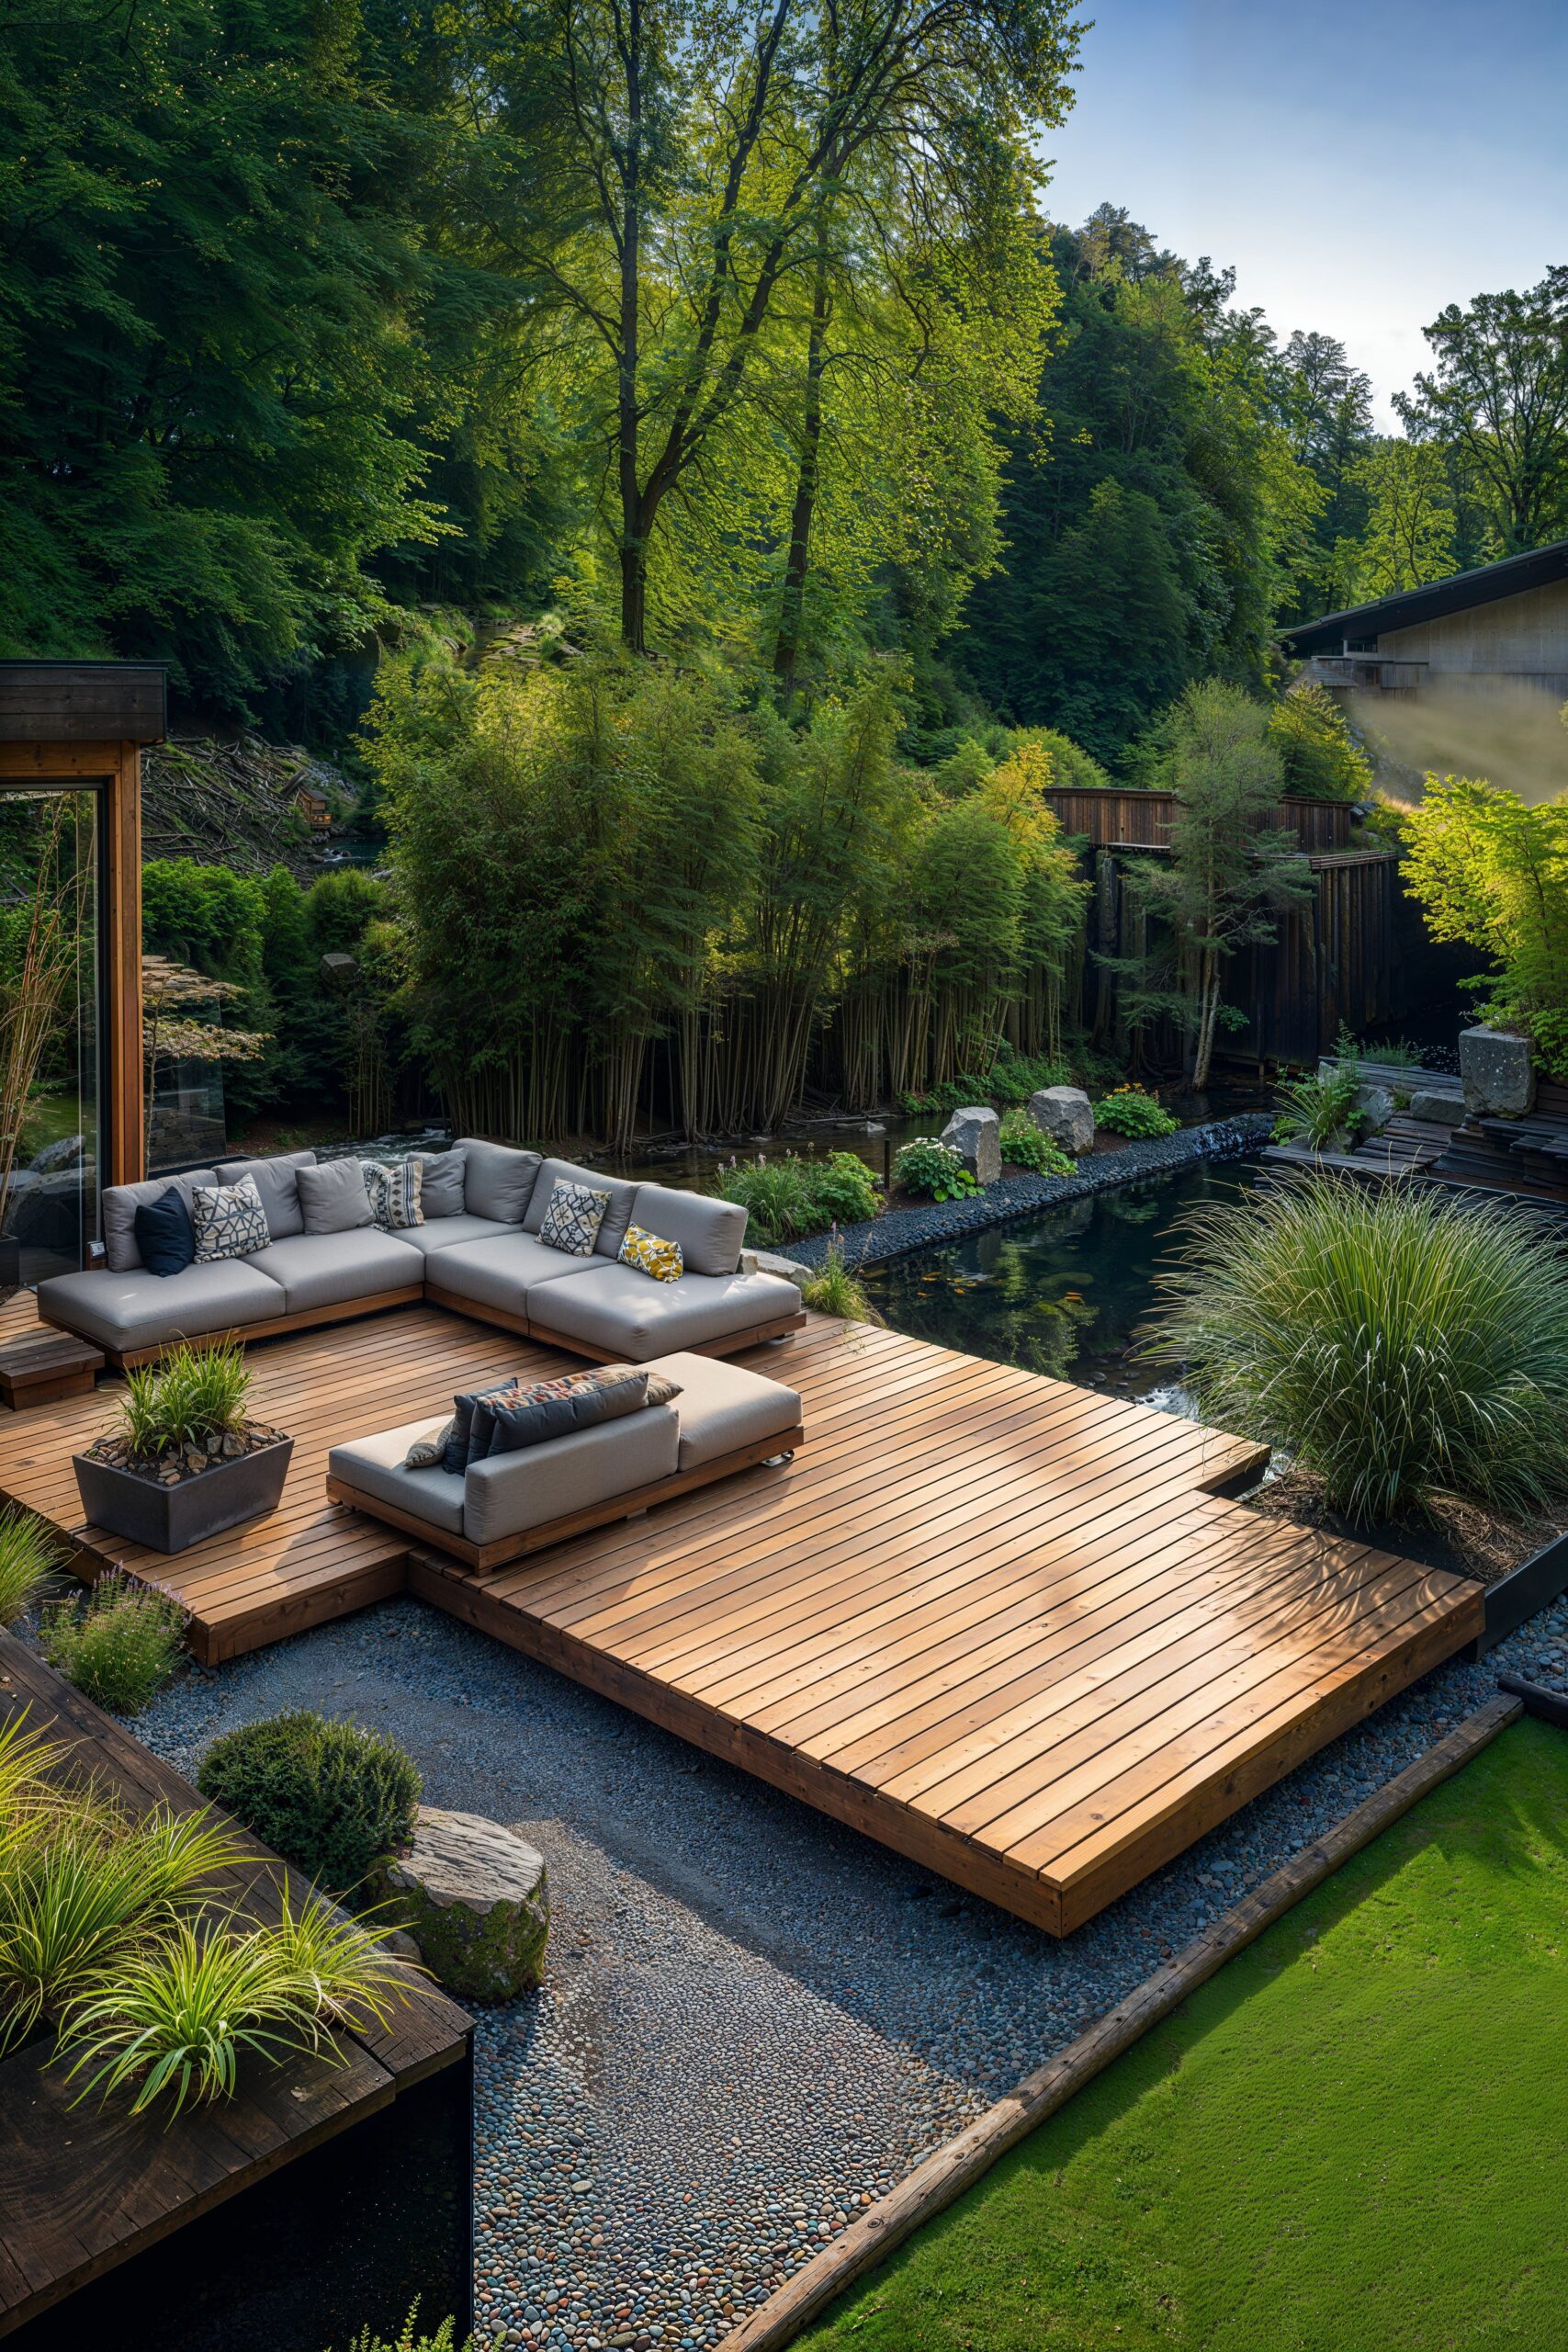 Transforming Your Backyard with Beautiful Landscaping Ideas